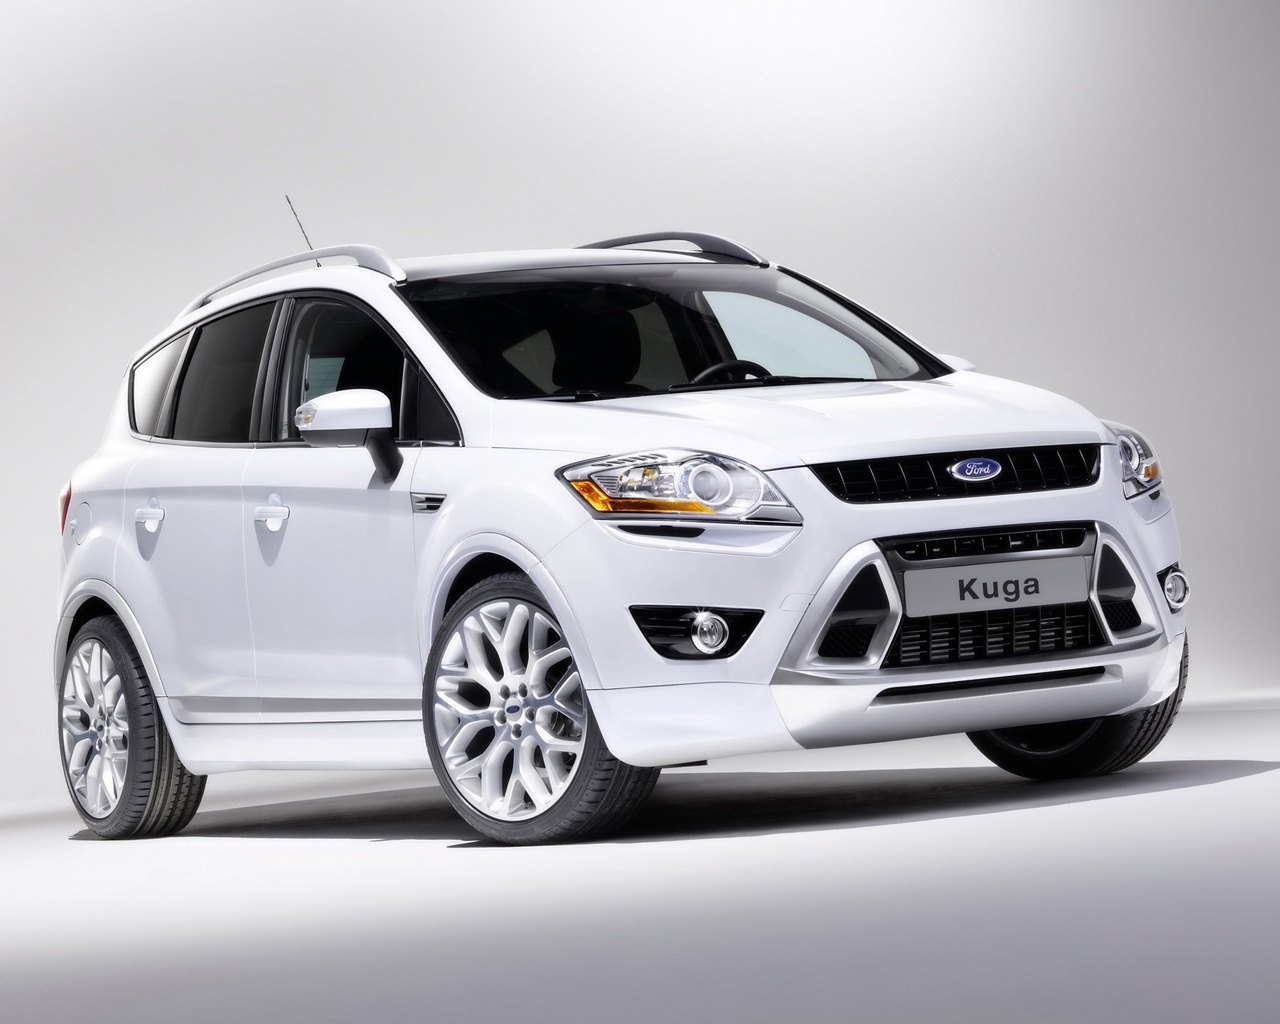 Ford Kuga Show Car for 1280 x 1024 resolution